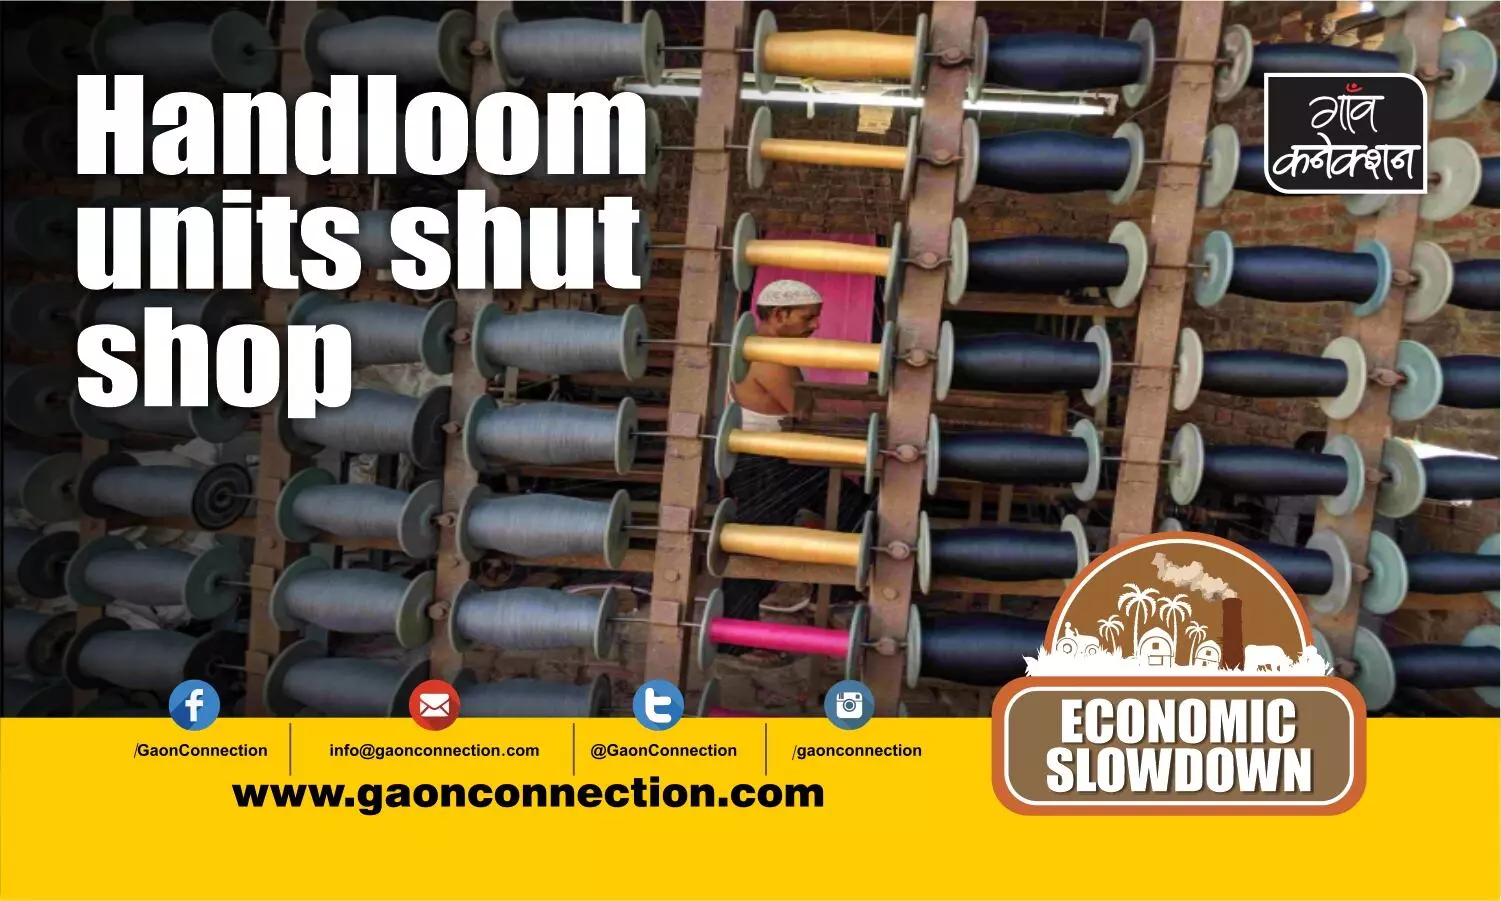 Ground report: Weavers forced to sell handloom machines as scrap